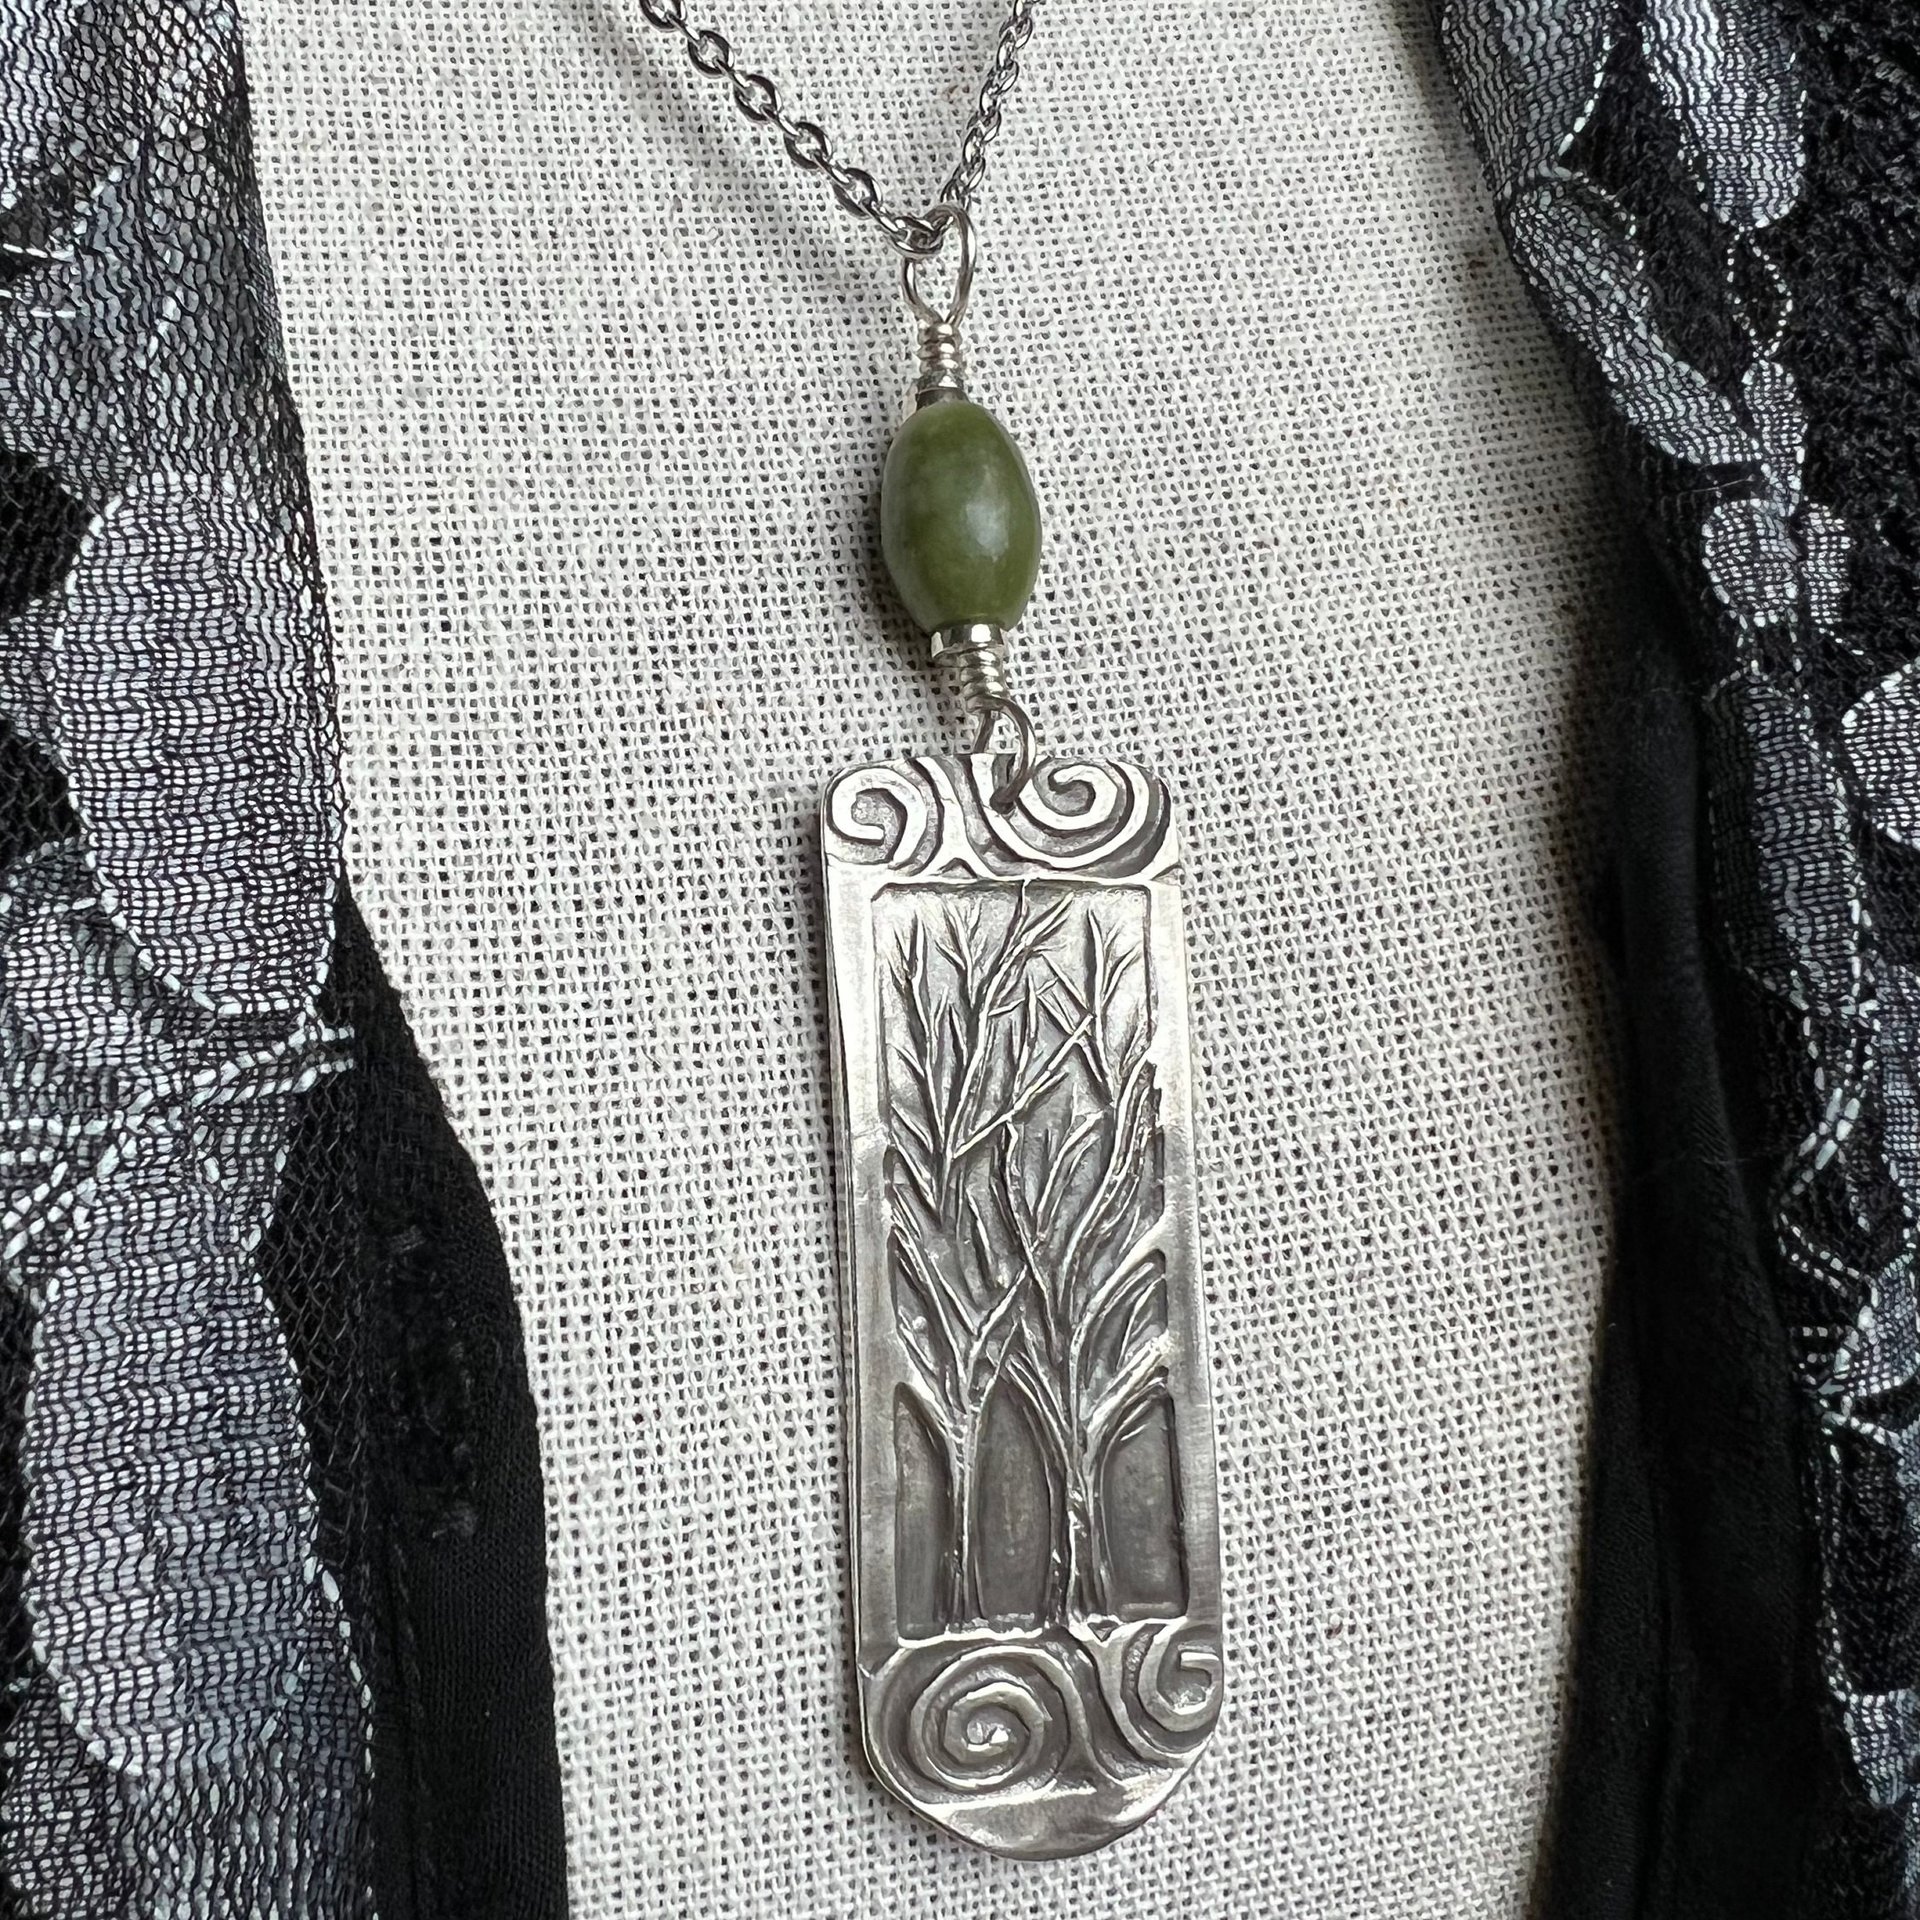 Two Trees Pendant, Sterling Silver, Connemara Marble, Long Skinny Tree Necklace, Intertwined Trees, Irish Celtic Spirals, Tree Branches